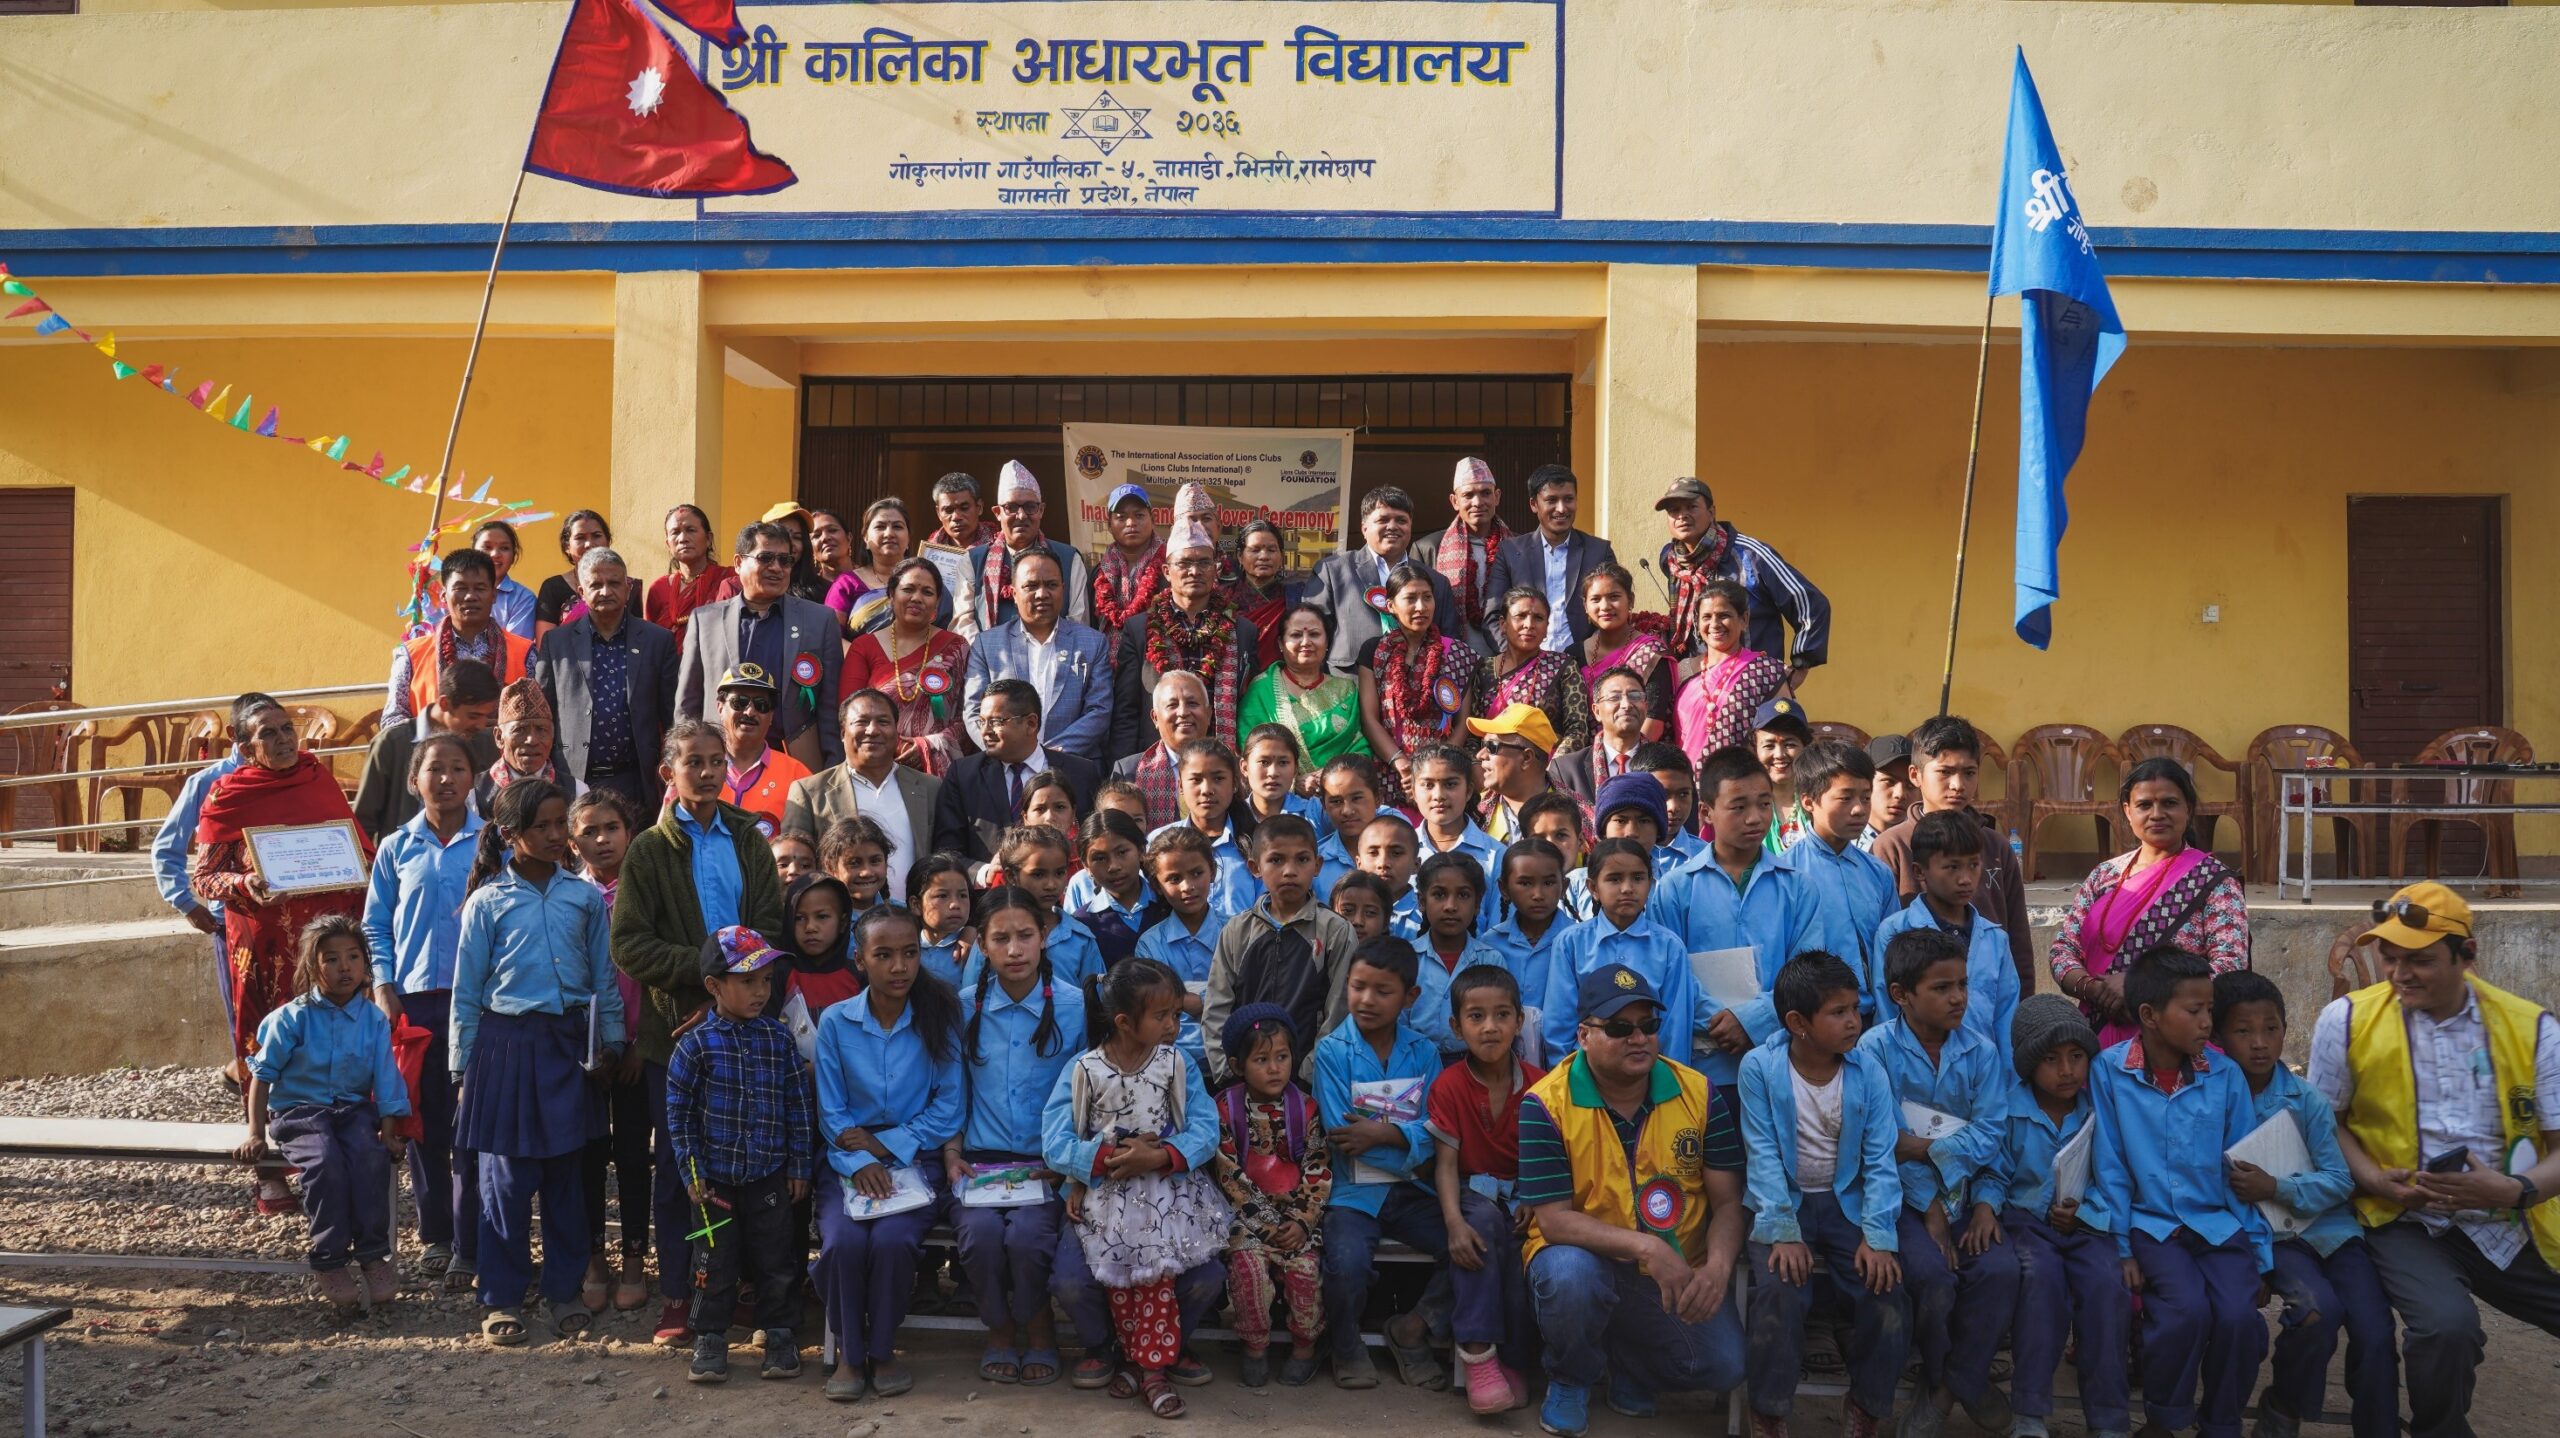 Rebuilding Nepal: LCIF Funds Over US$4.7 Million in Grants to Respond to the Gorkha Earthquake